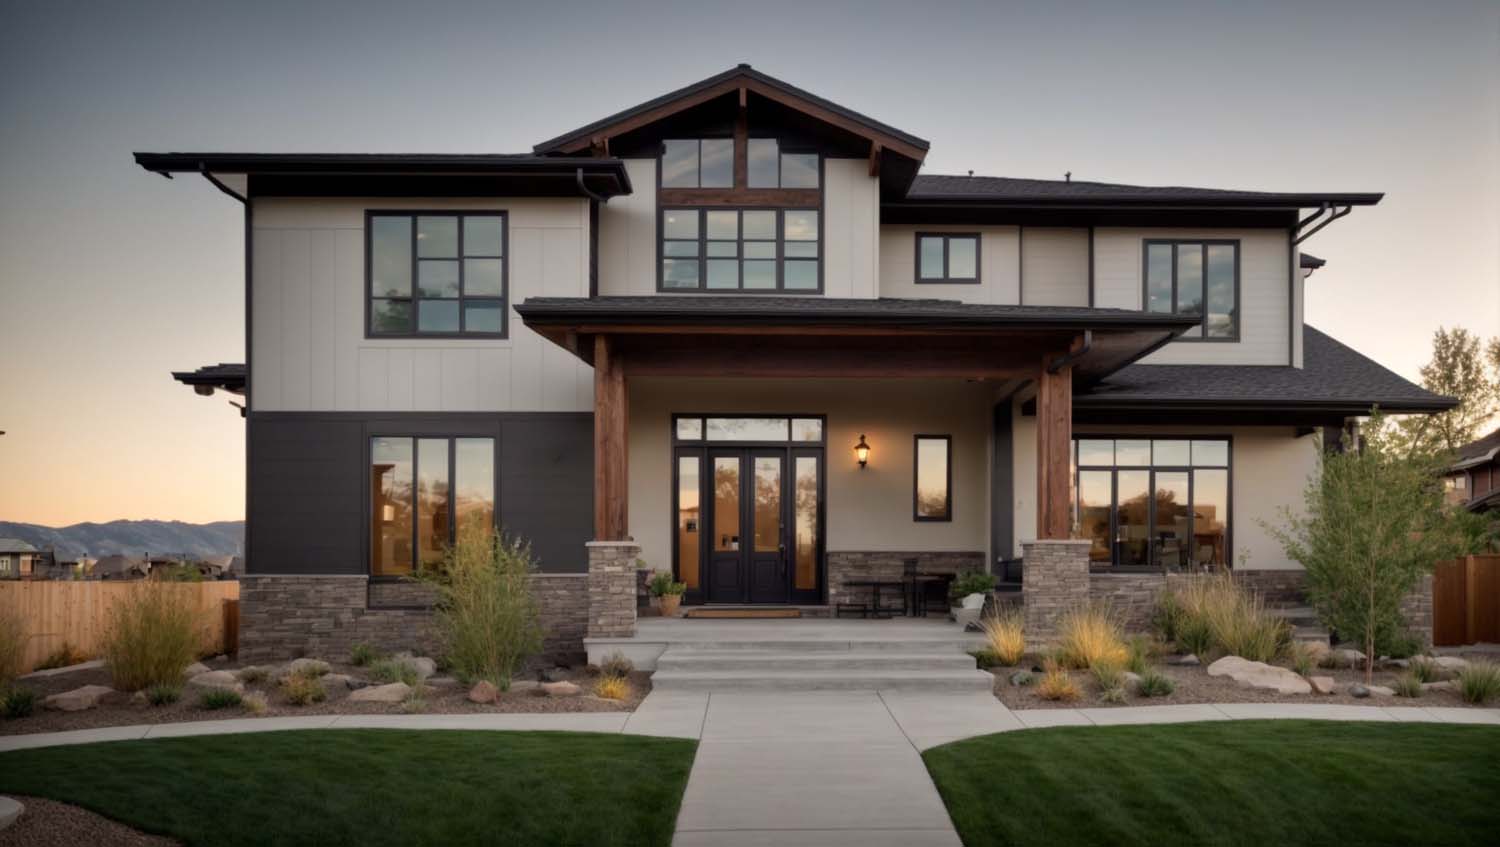 Colorado’s wood siding needs are capably met by Boulder’s providers.